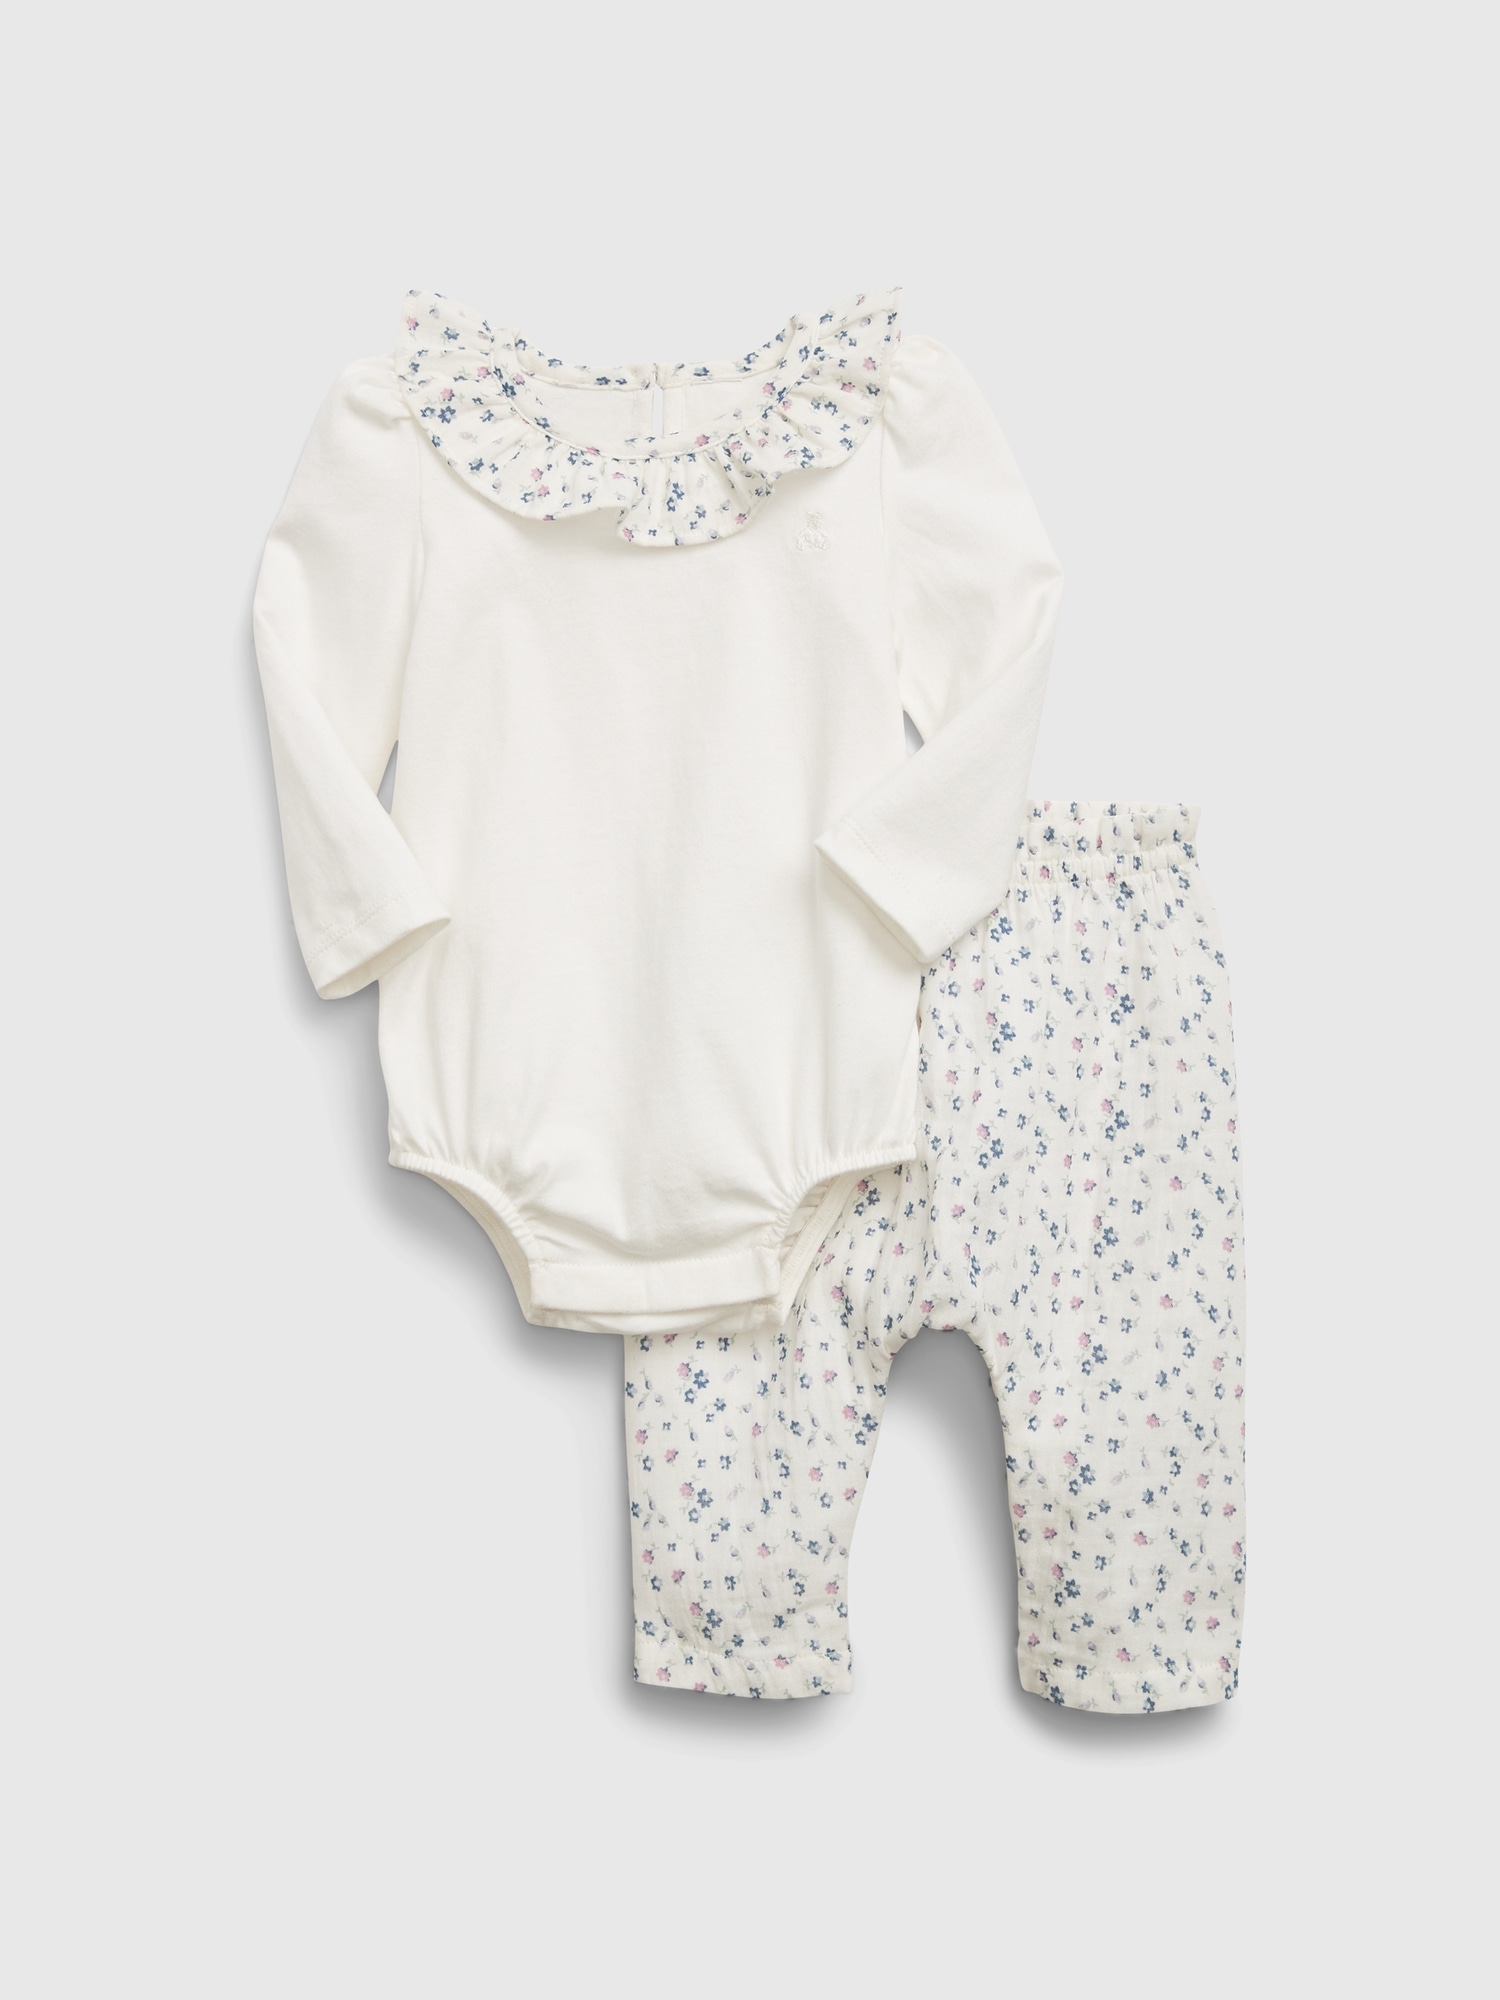 Baby Organic Cotton Outfit Set